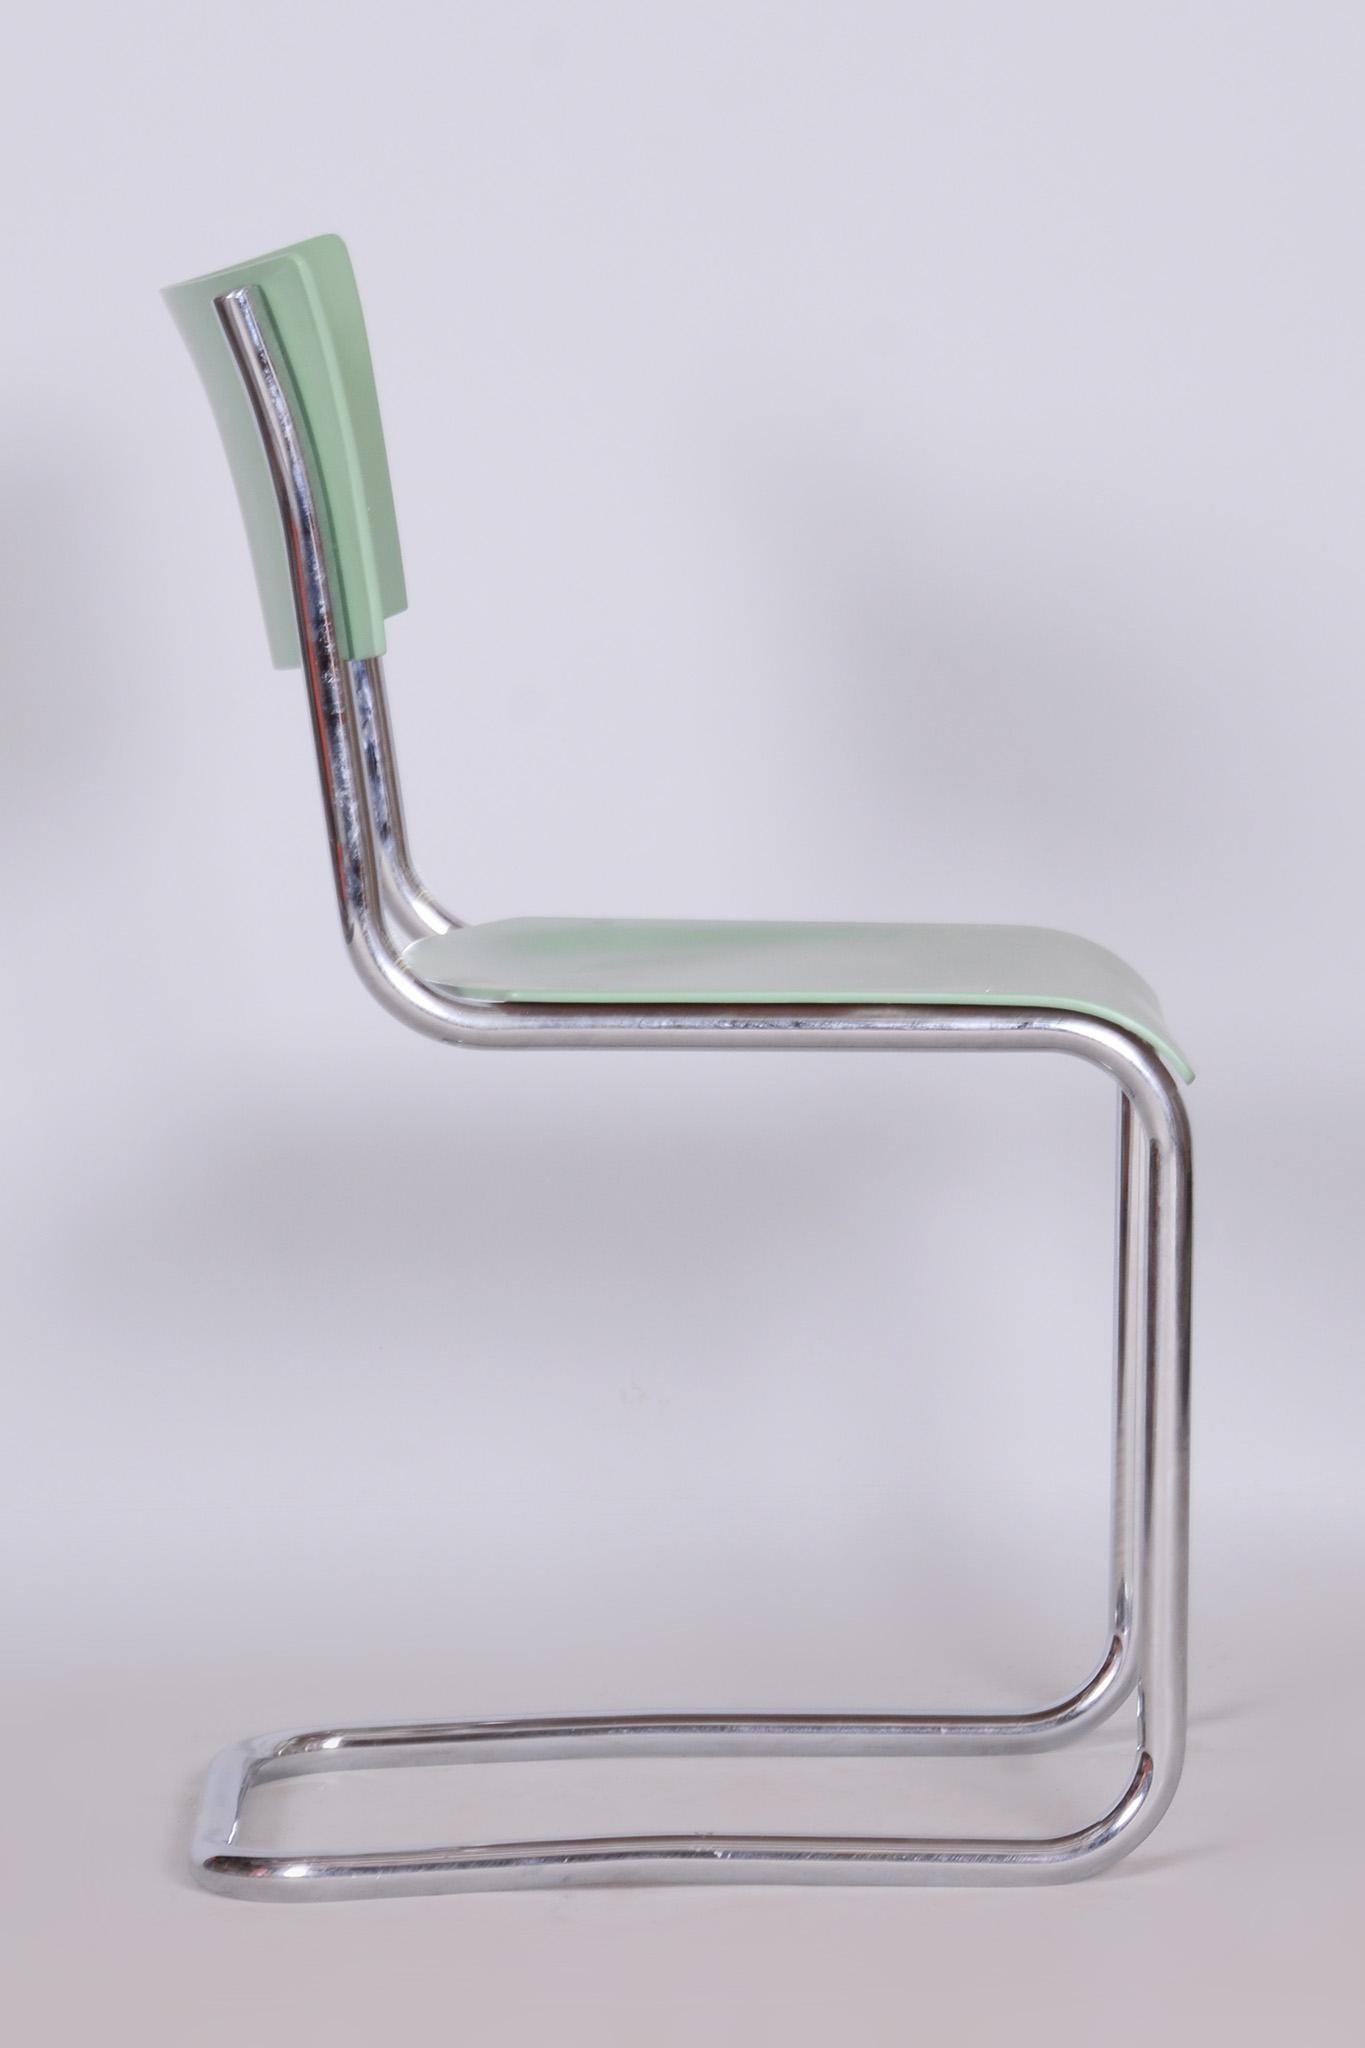 Bauhaus Writing Desk and Chair, Thonet, Chrome-Plated Steel, Czechia, 1930s For Sale 1